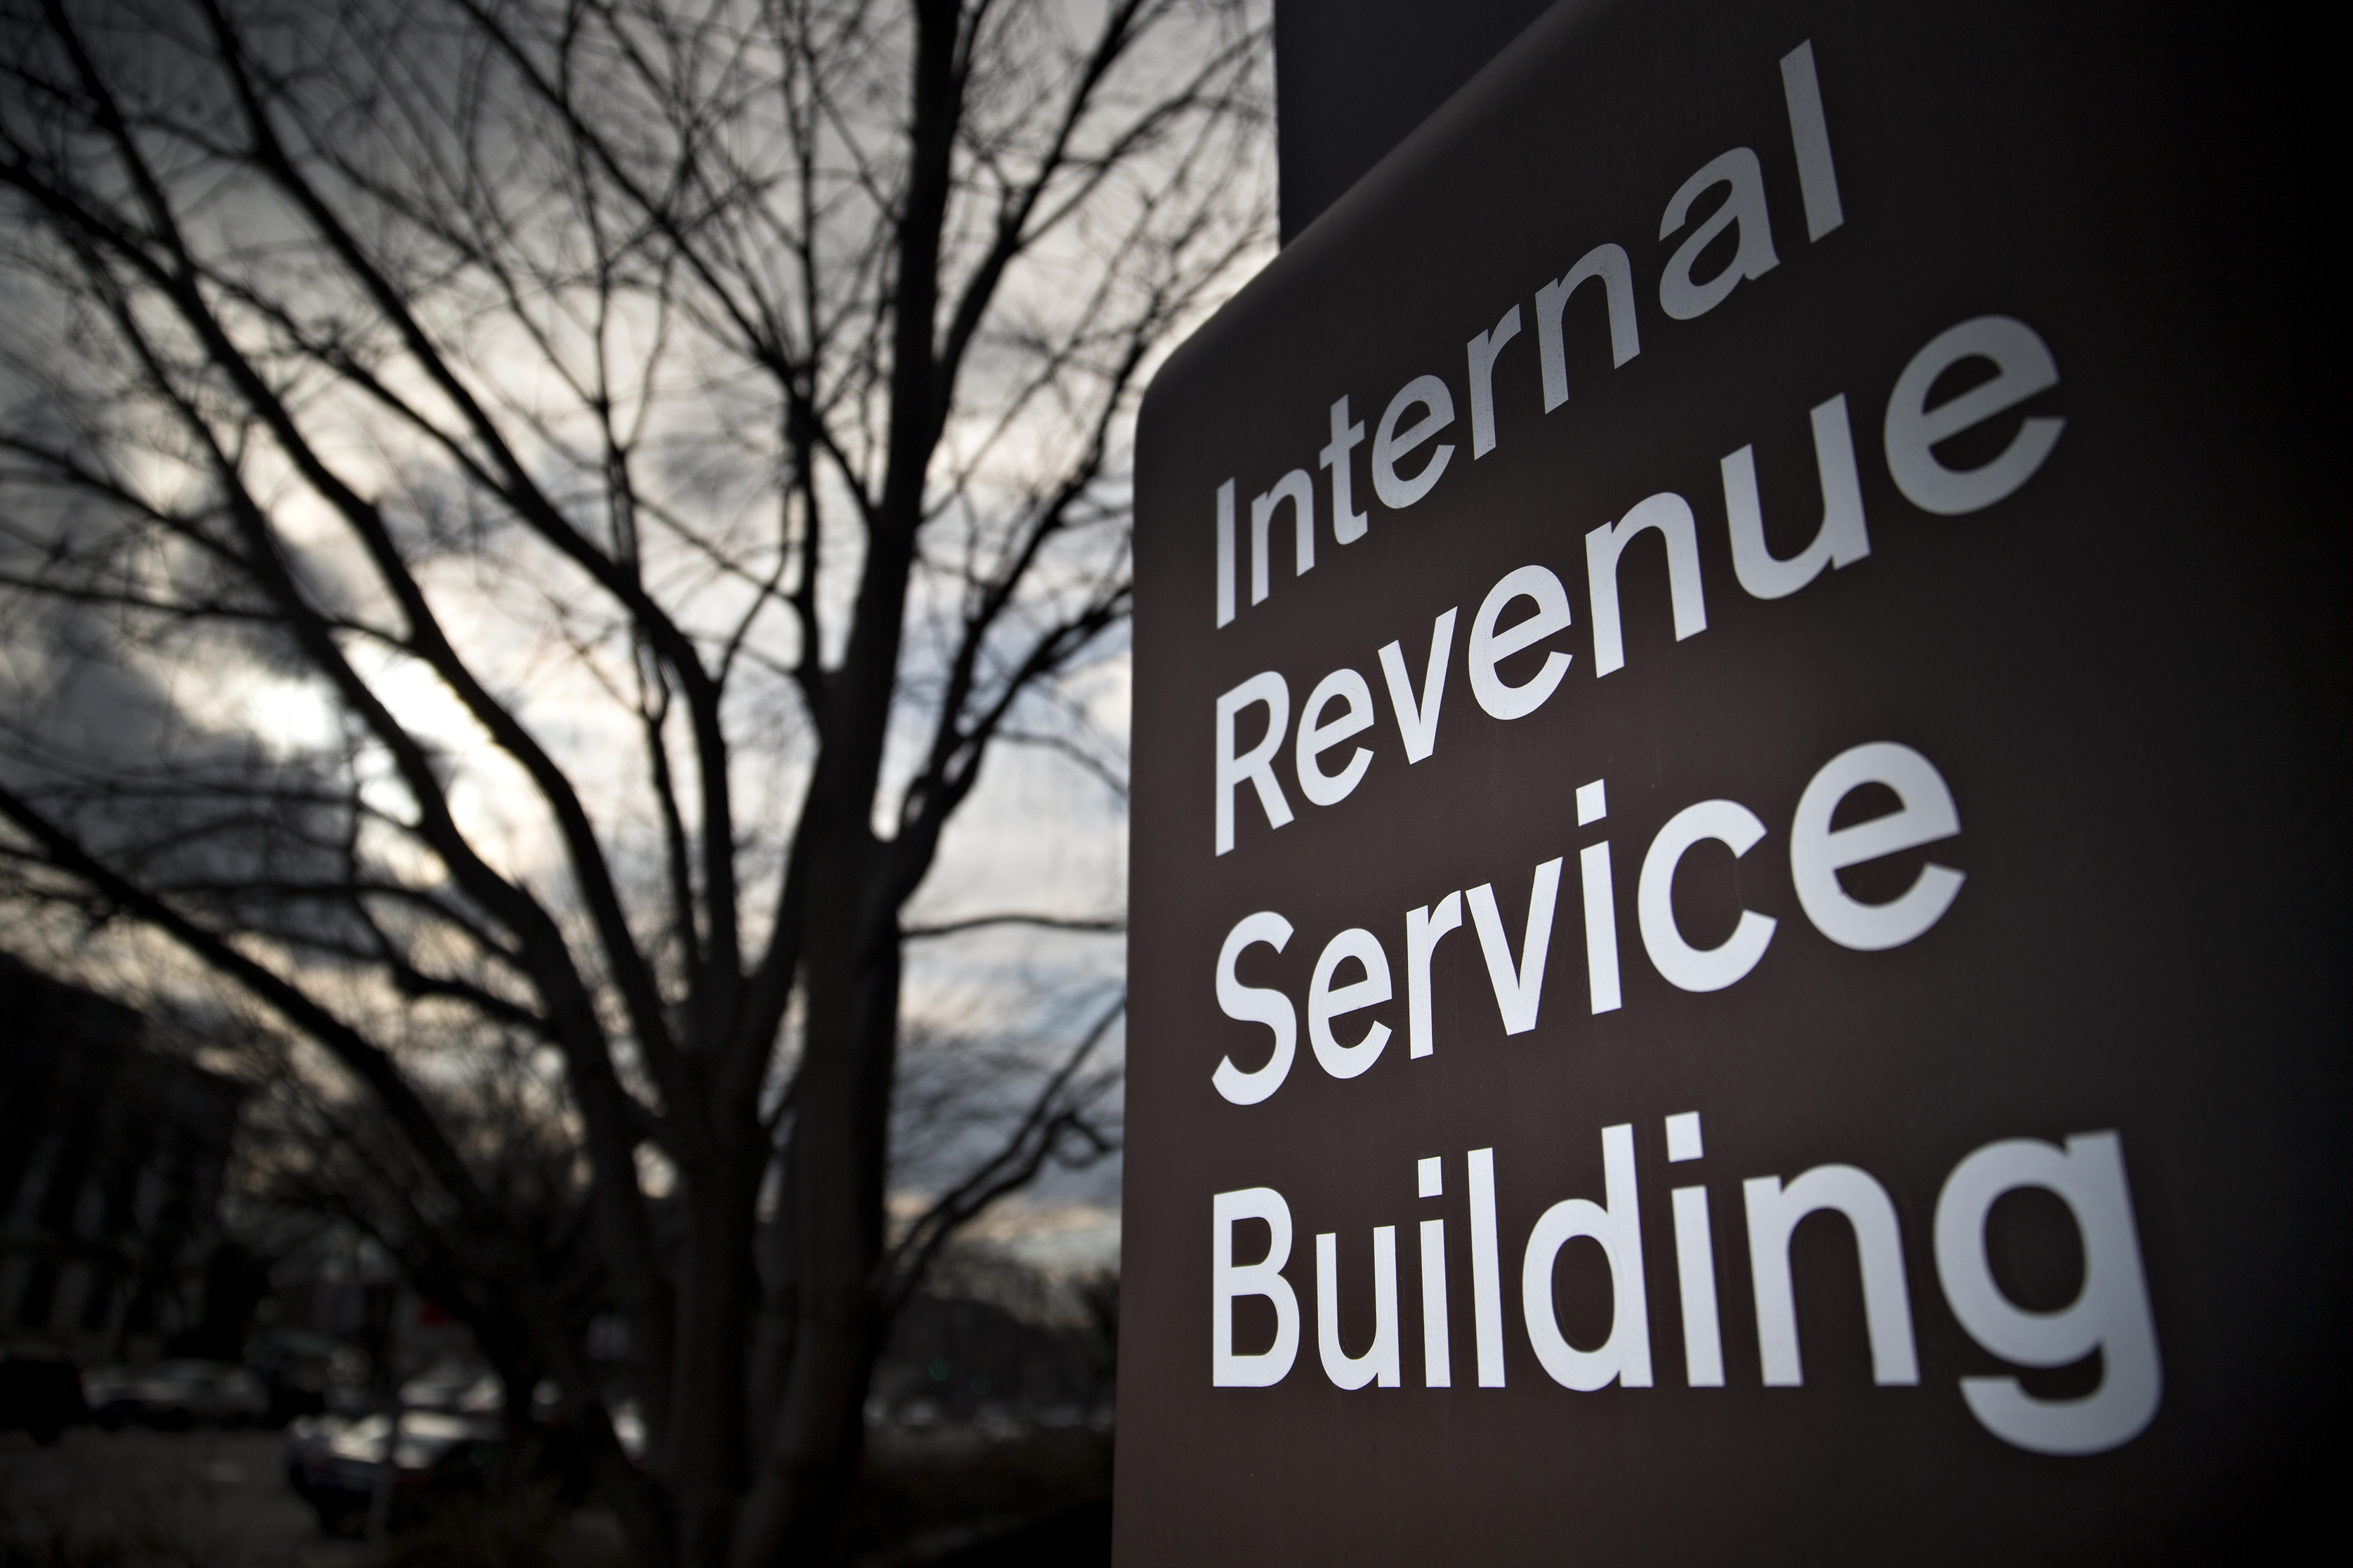 Signage for the Internal Revenue Service (IRS) stands outside the IRS headquarters building in Washington, D.C., U.S., on Wednesday, Feb. 17, 2016. (Andrew Harrer—Bloomberg/Getty Images)